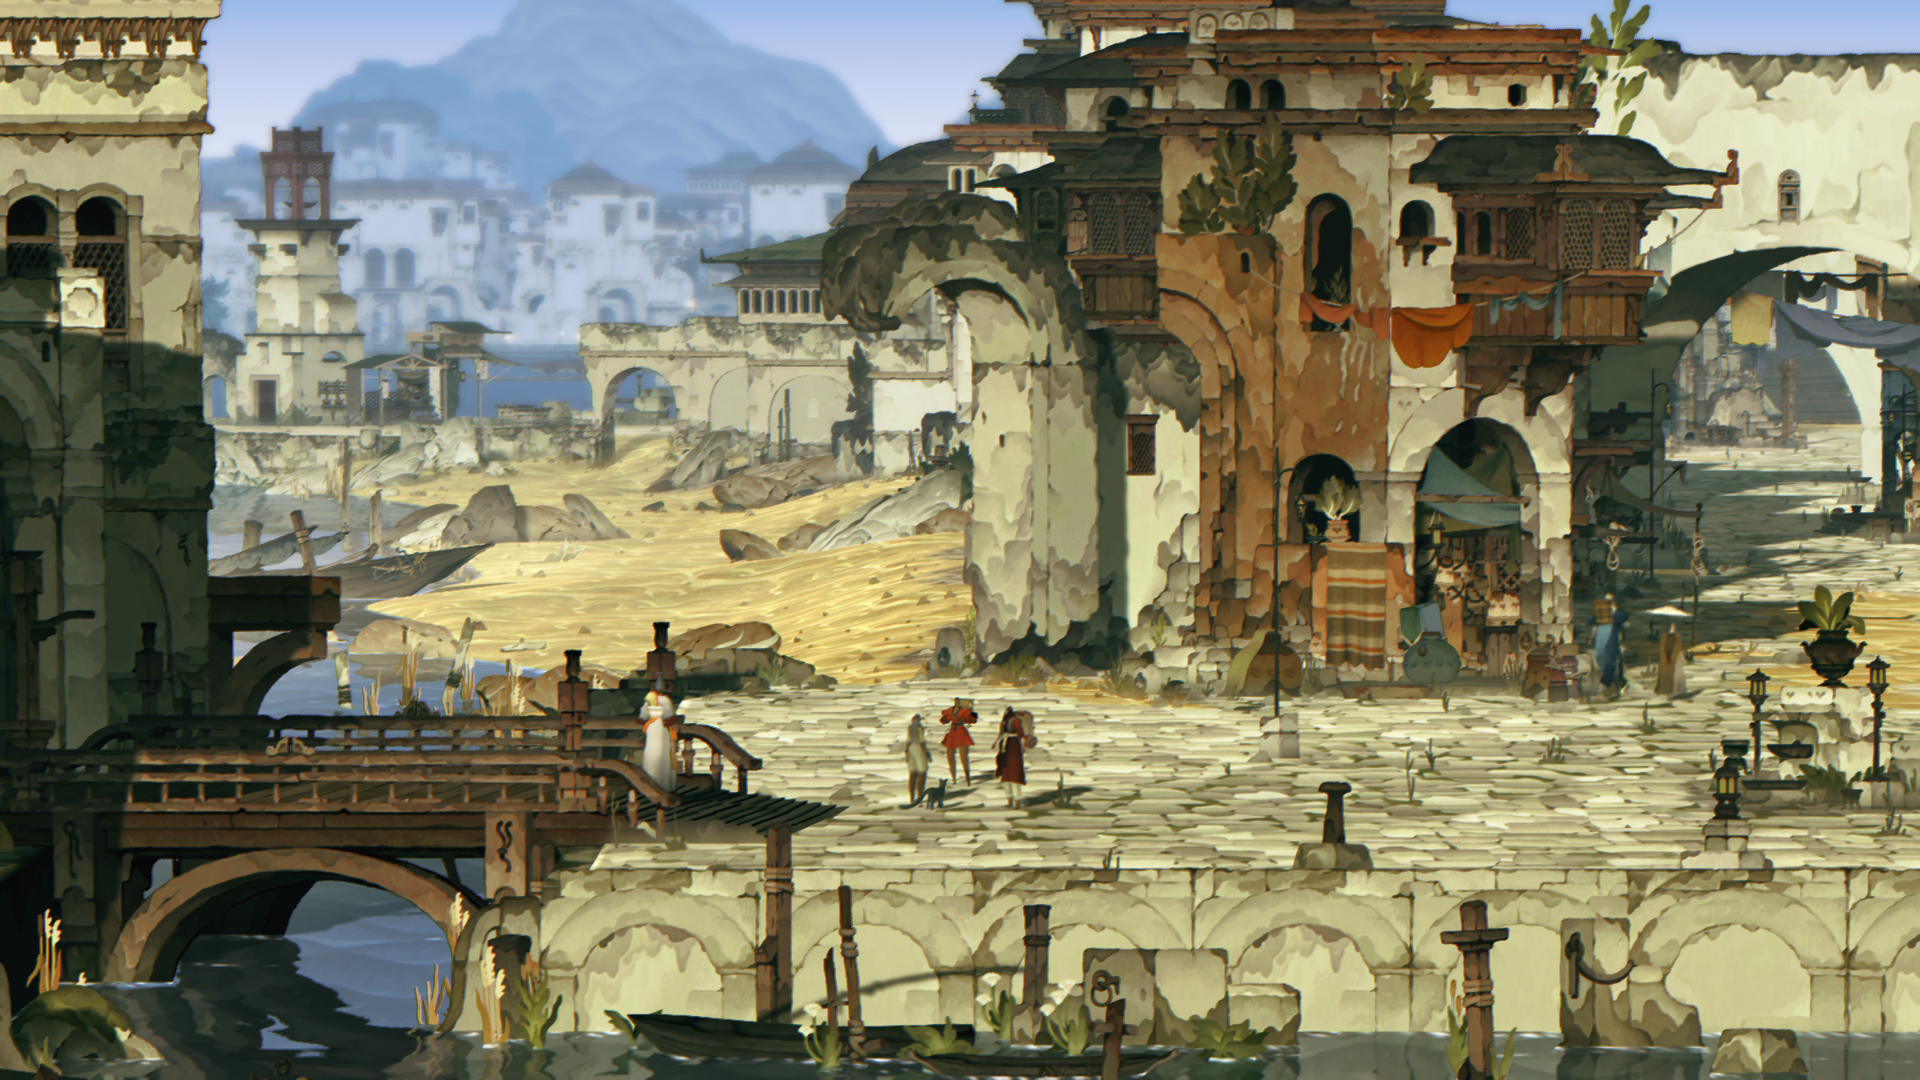 An image from the game Book of Travels showcasing the city of Kasa, a charming waterfront locale with old buildings and characters gathered around a cat. The city's close proximity to the water and its vibrant community life are striking features of the game's immersive environment.